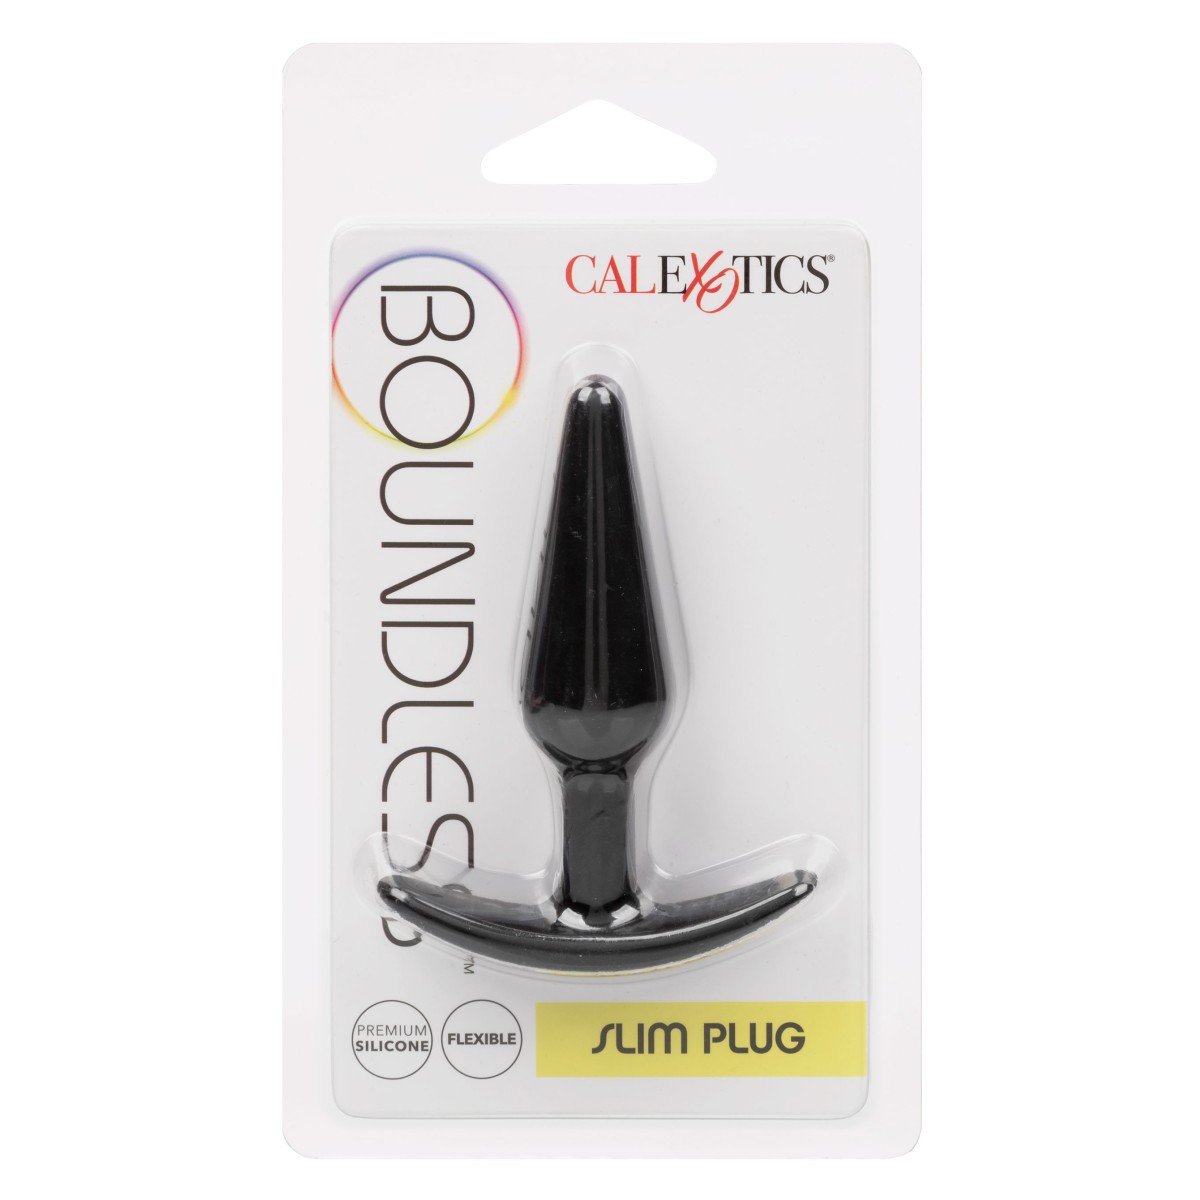 Plug anale in silicone Boundless Slim Plug